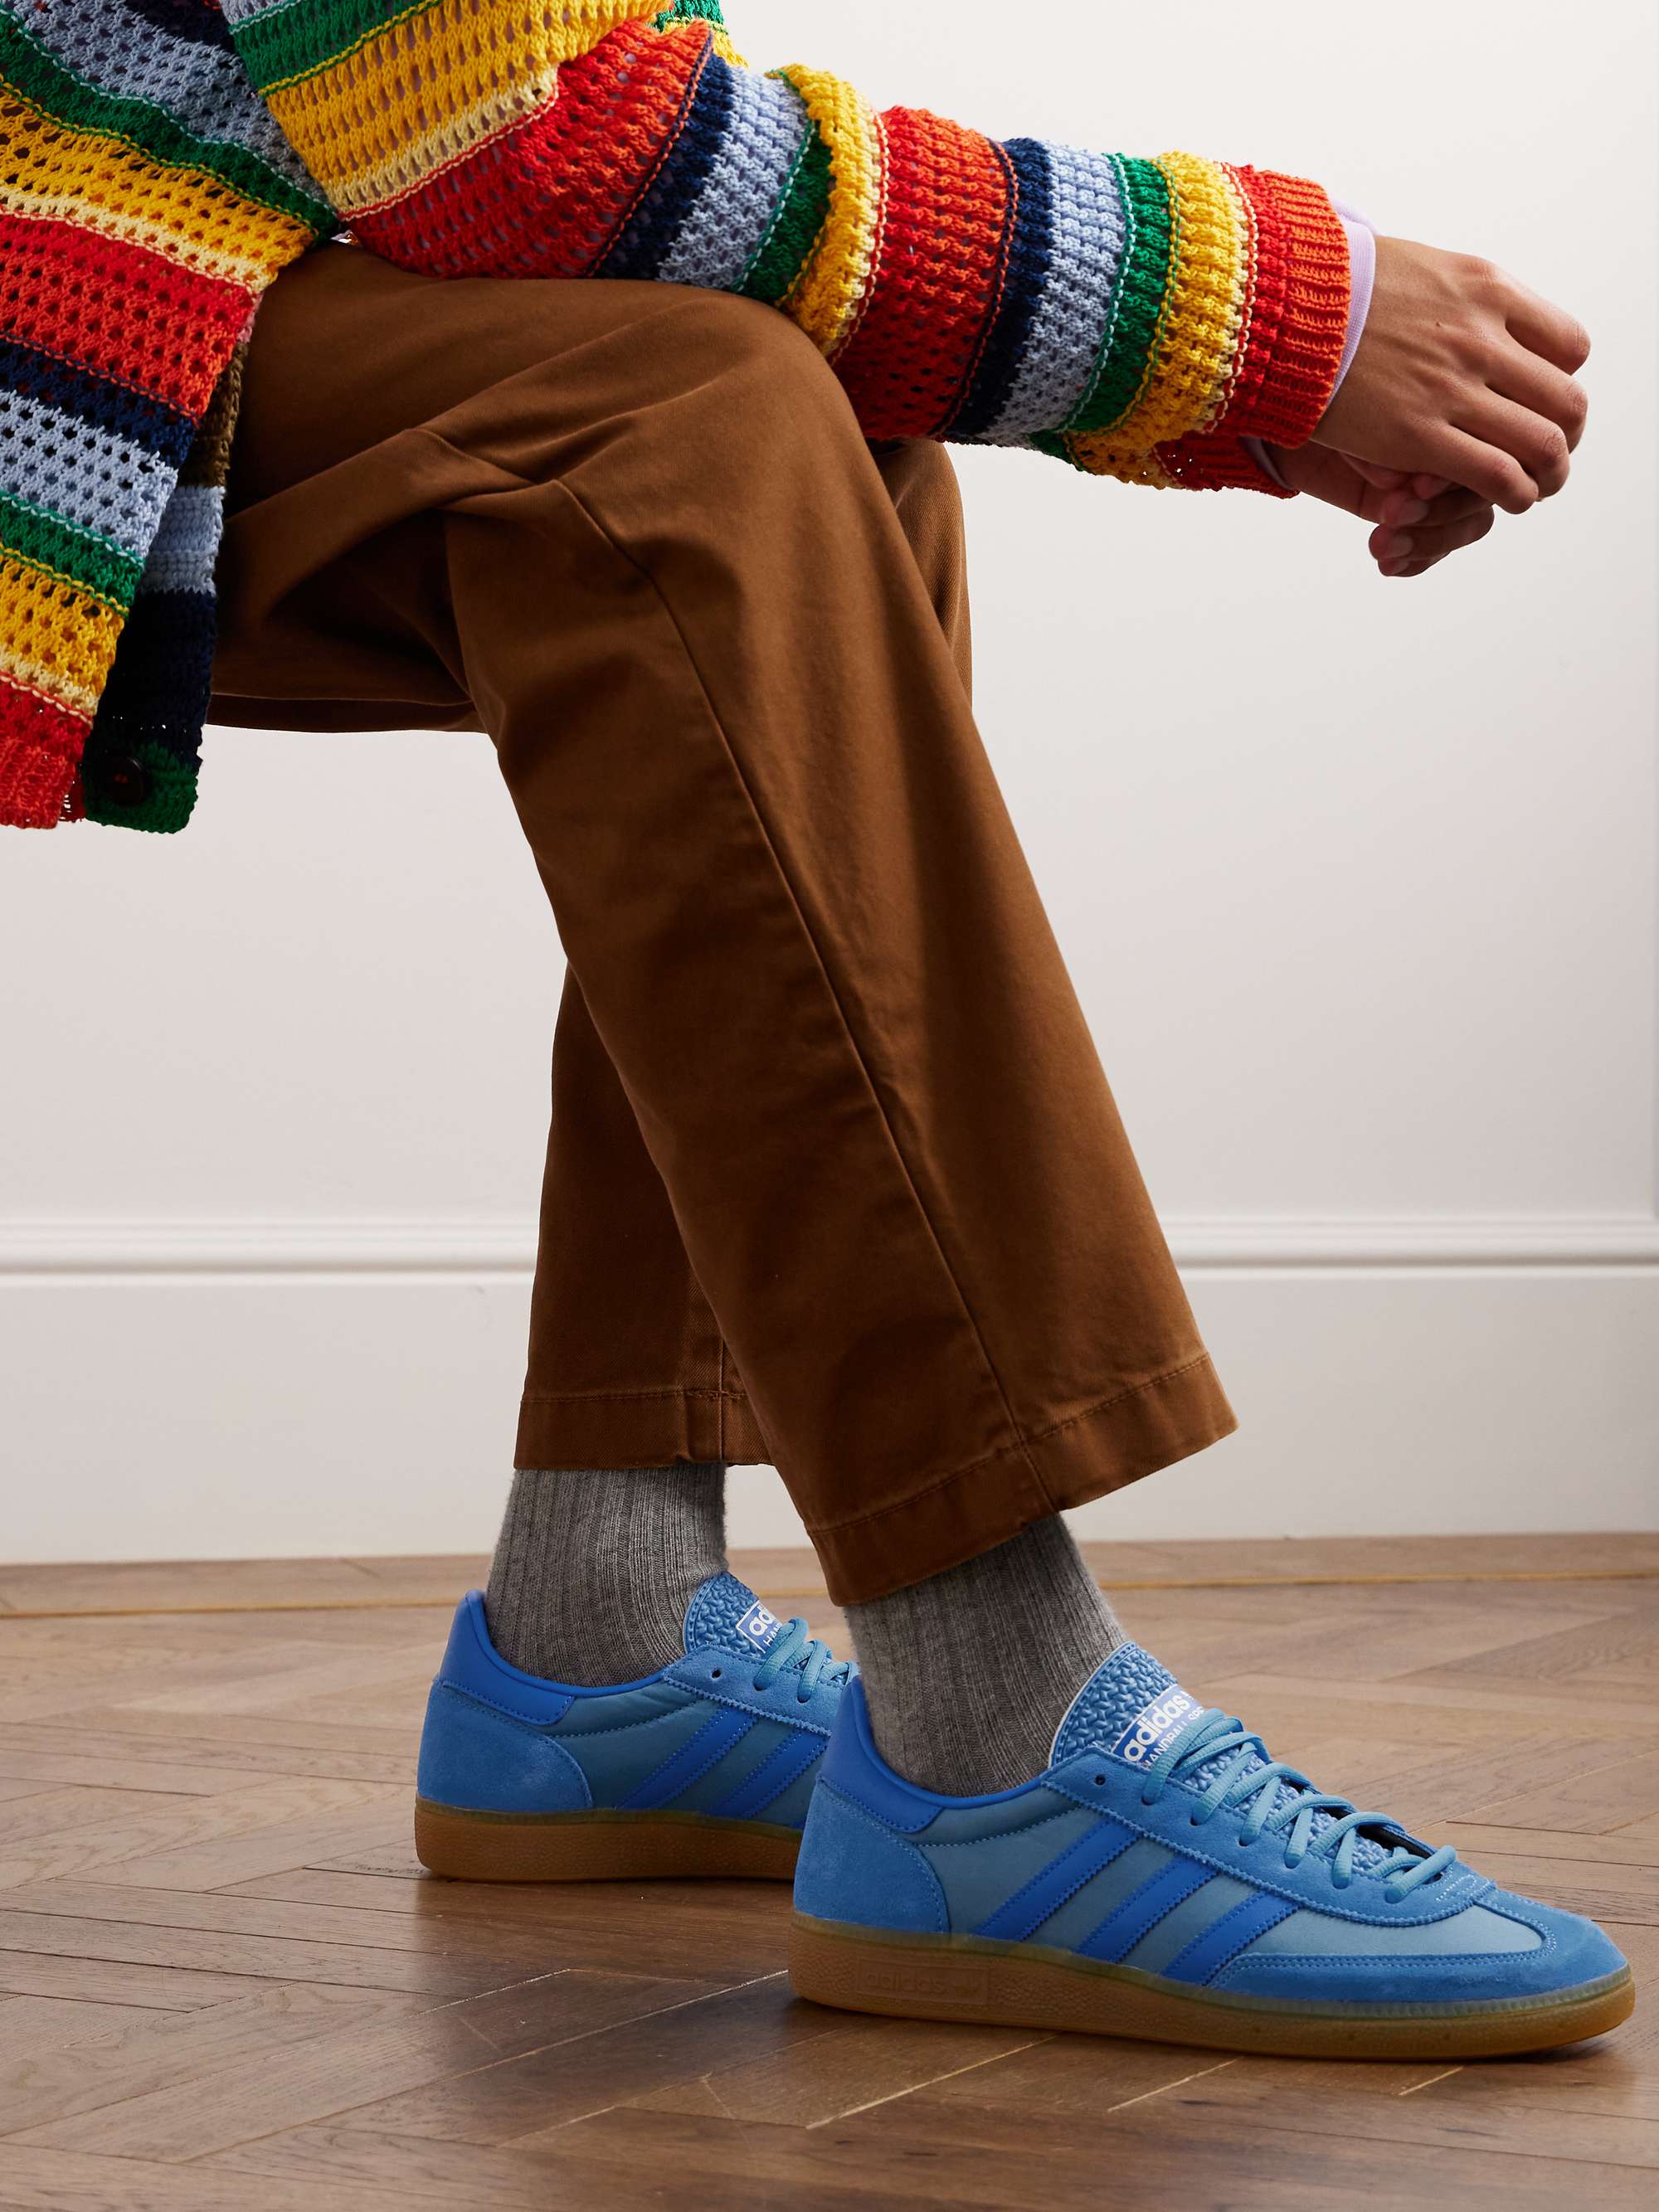 ADIDAS ORIGINALS Handball Spezial Leather-Trimmed Suede and Mesh Sneakers  for Men | MR PORTER